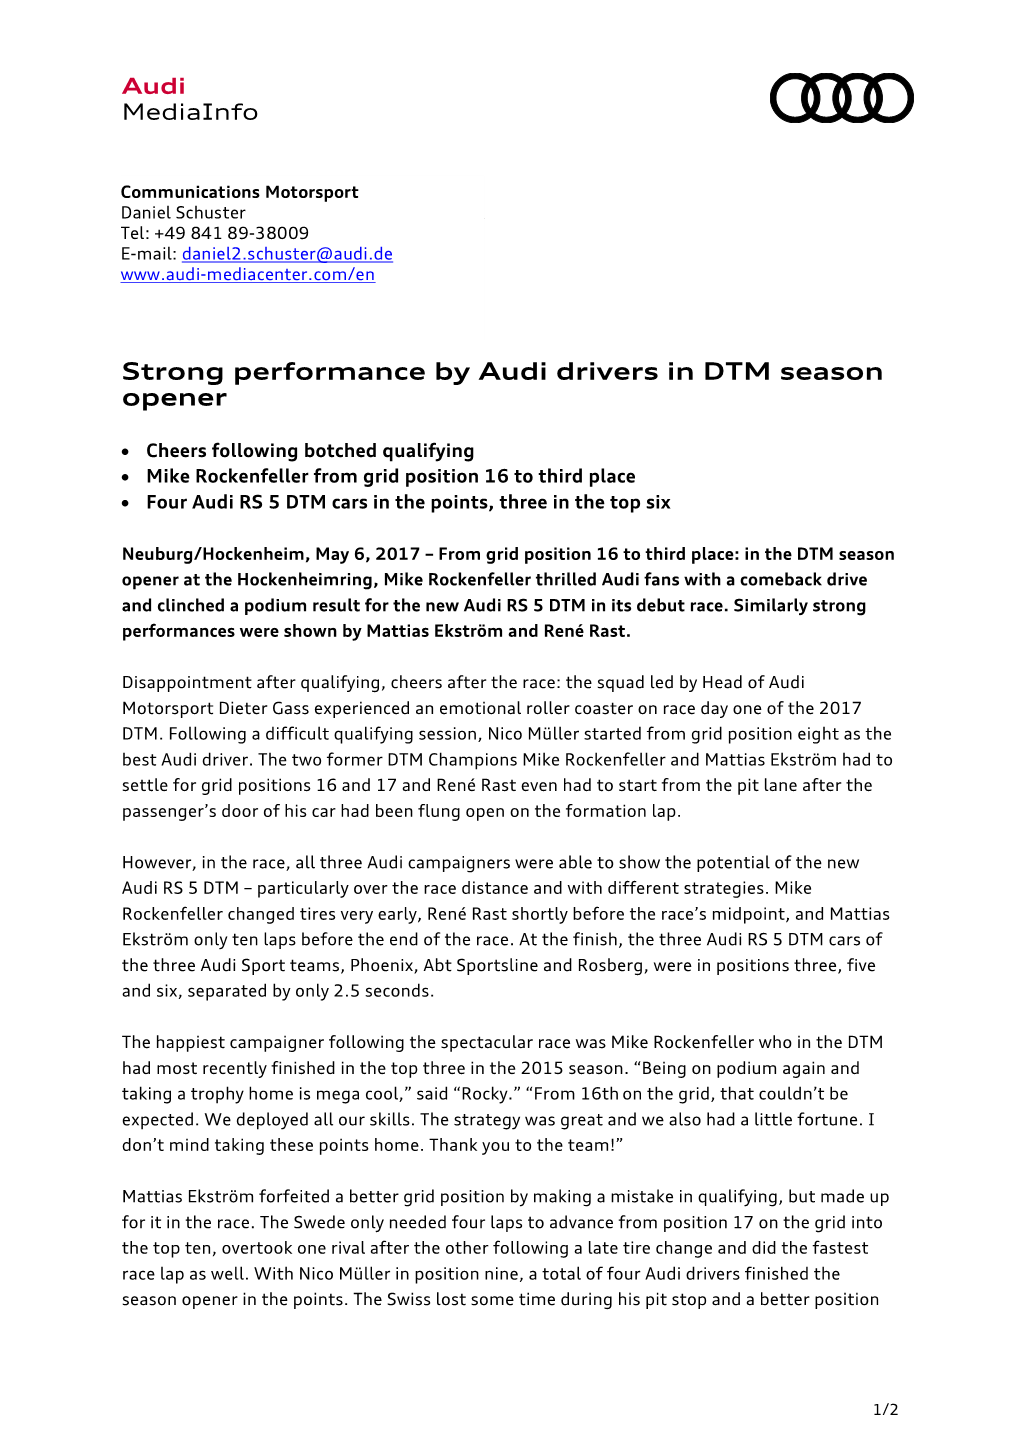 Strong Performance by Audi Drivers in DTM Season Opener